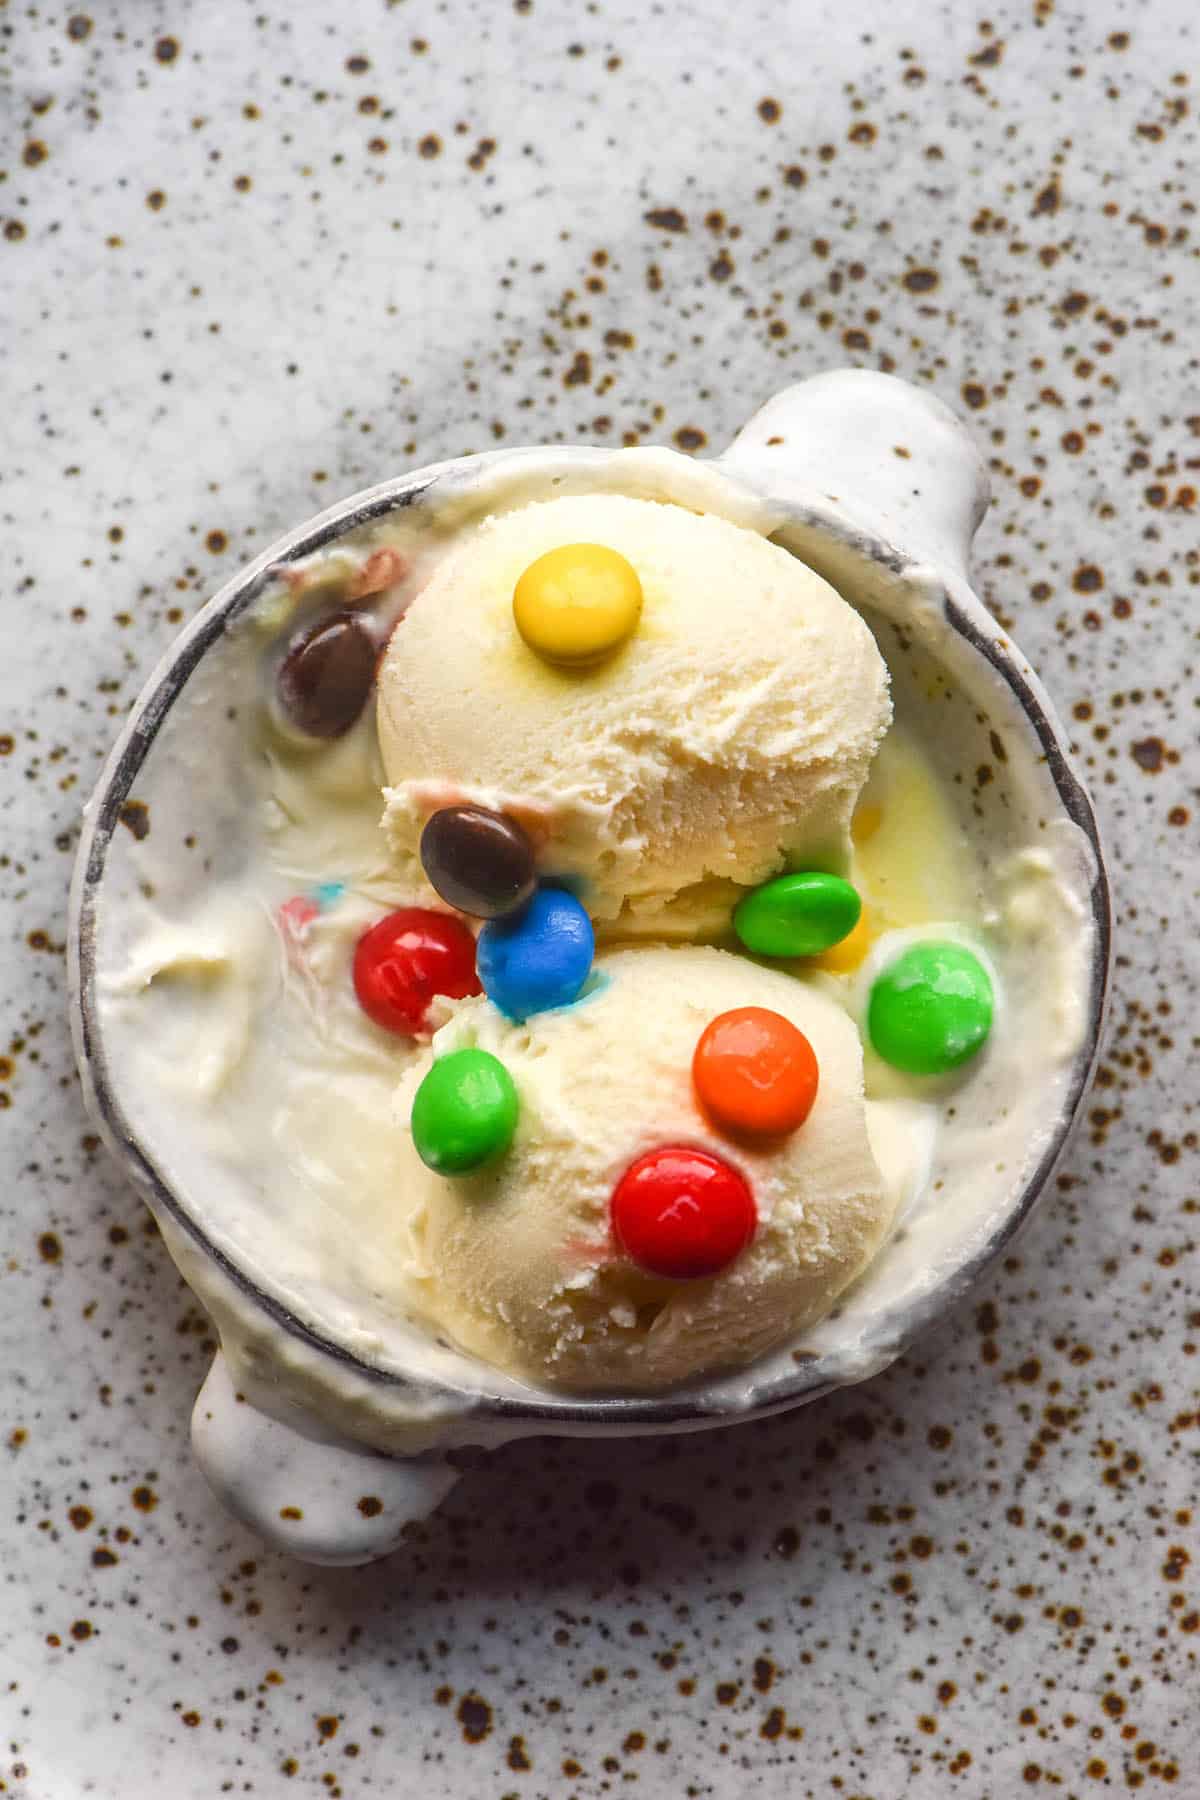 An aerial image of two scoops of vanilla ice cream in a small white ceramic bowl atop a white ceramic plate. The scoops are melting and topped with mnms